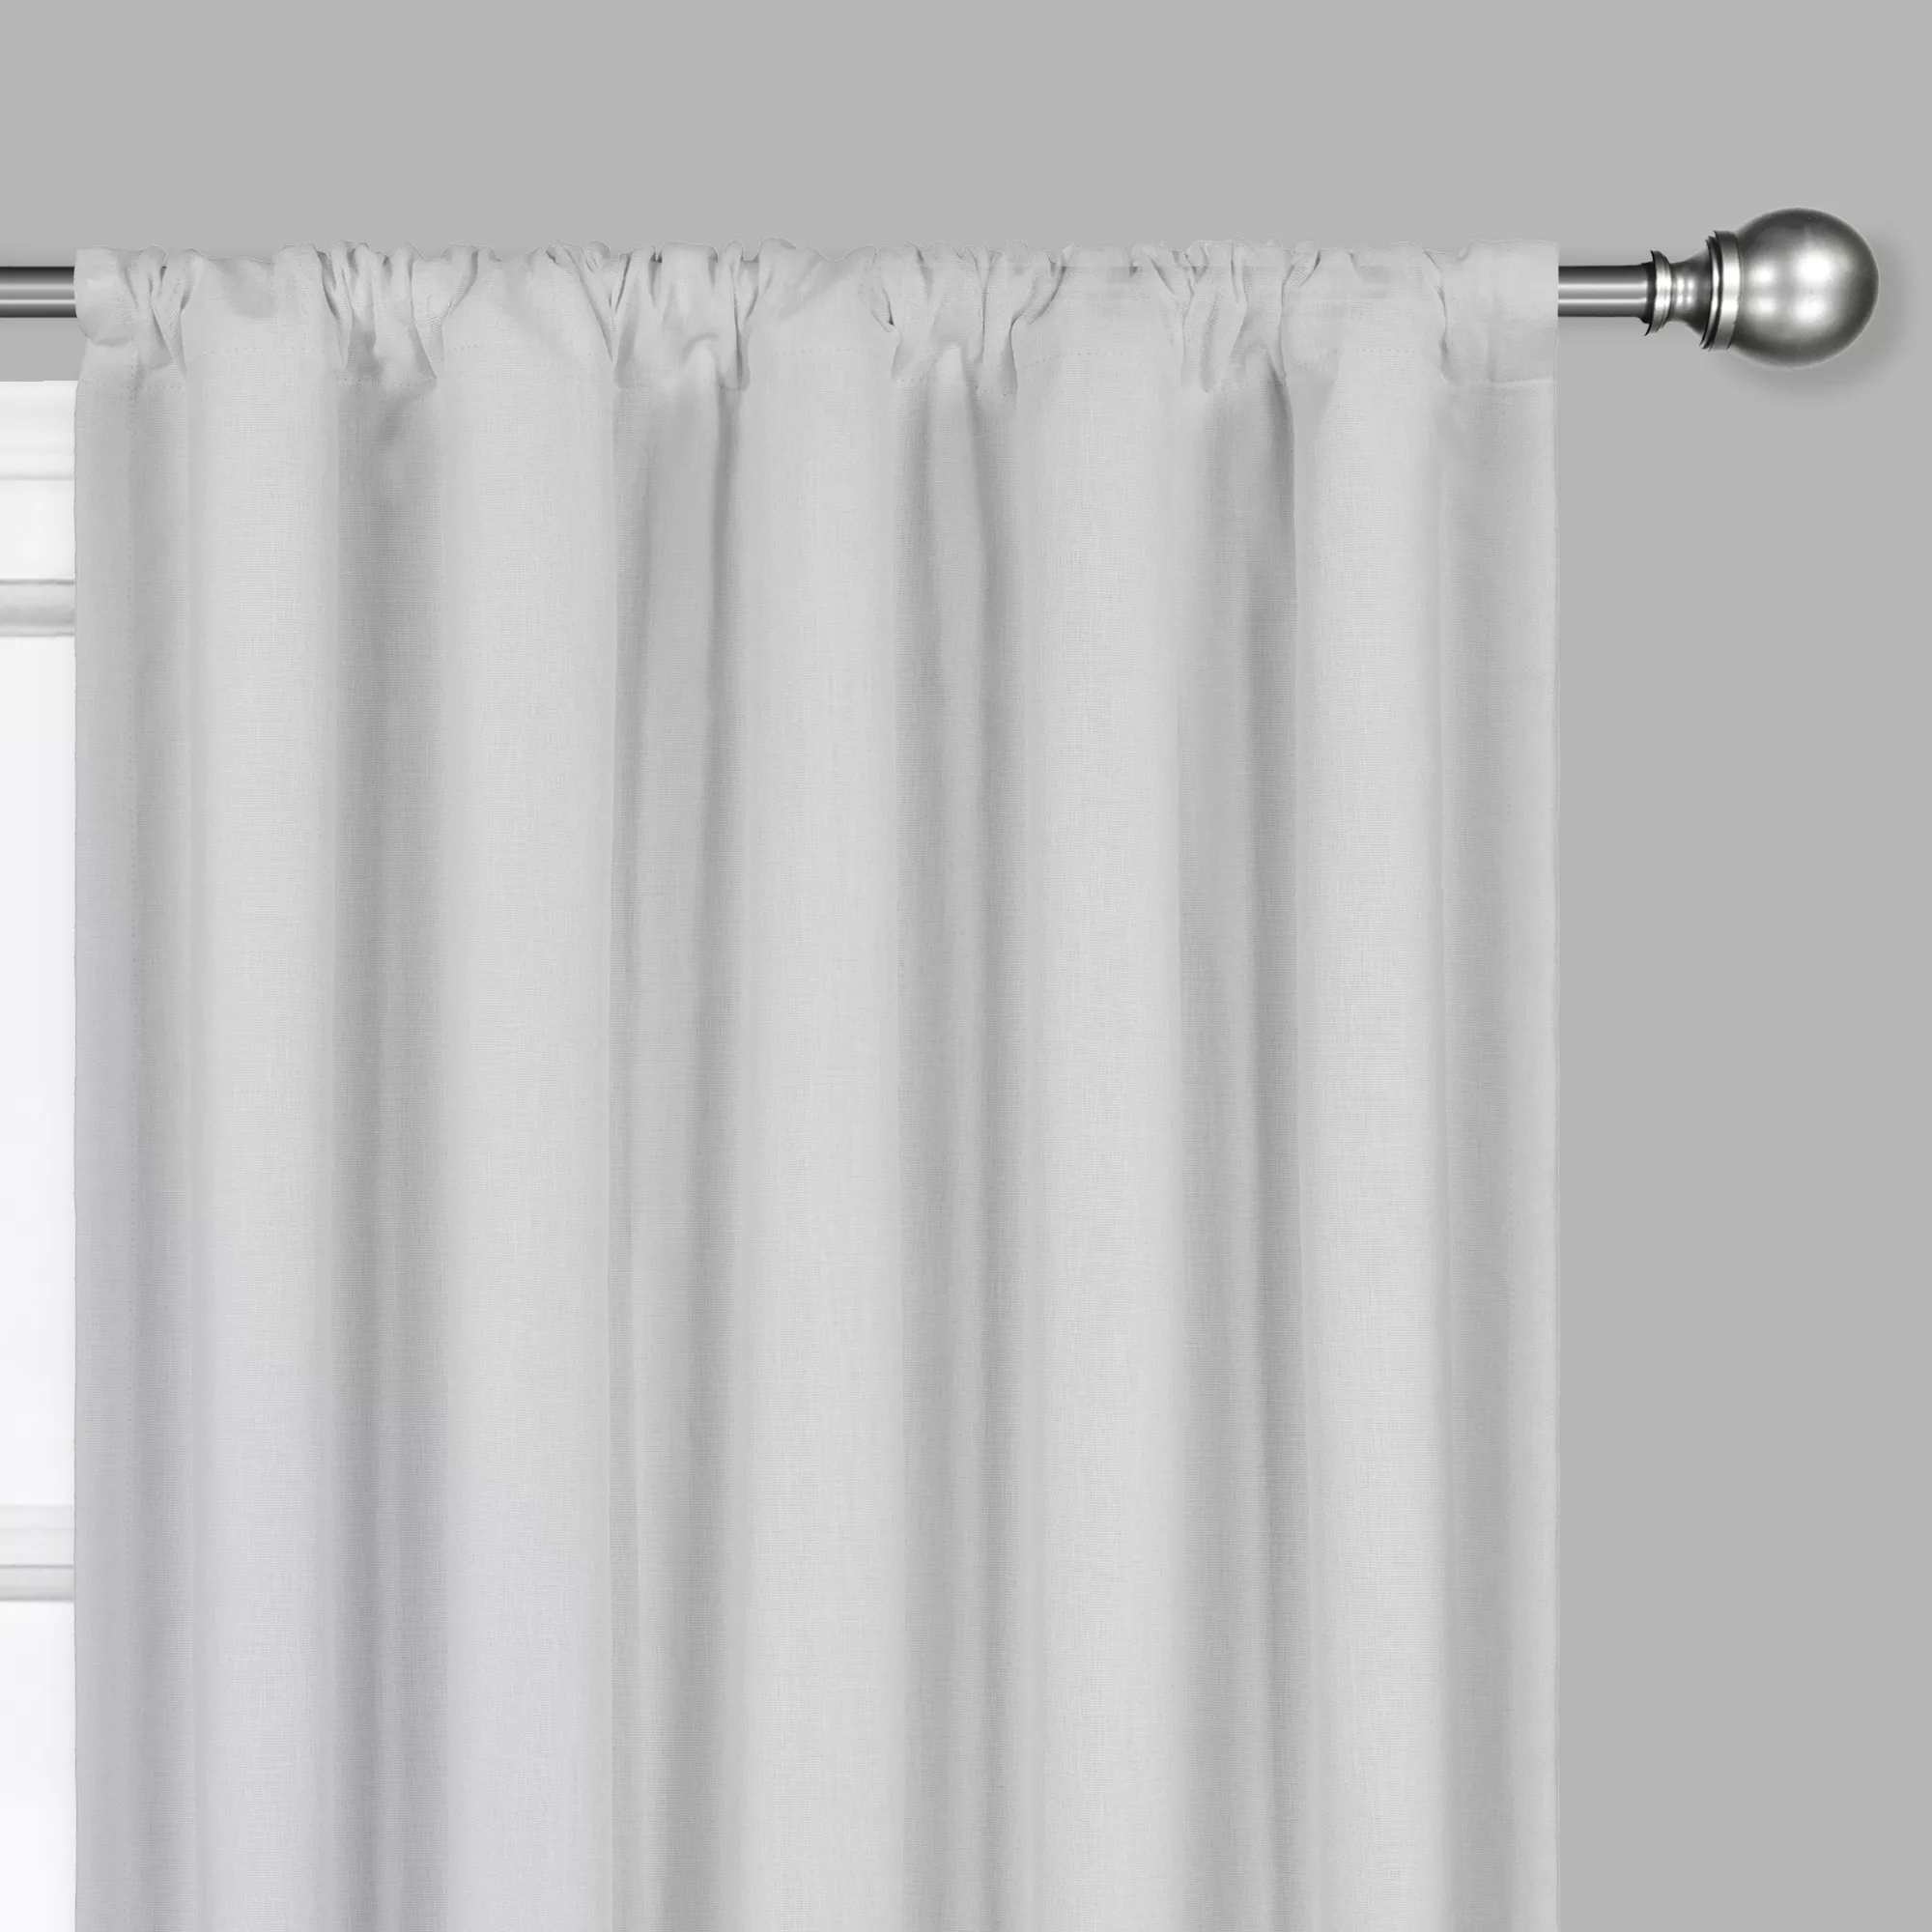 Brookstone® Zoey Solid 84-Inch Rod Pocket 100% Blackout Curtain Panel in White (Single)